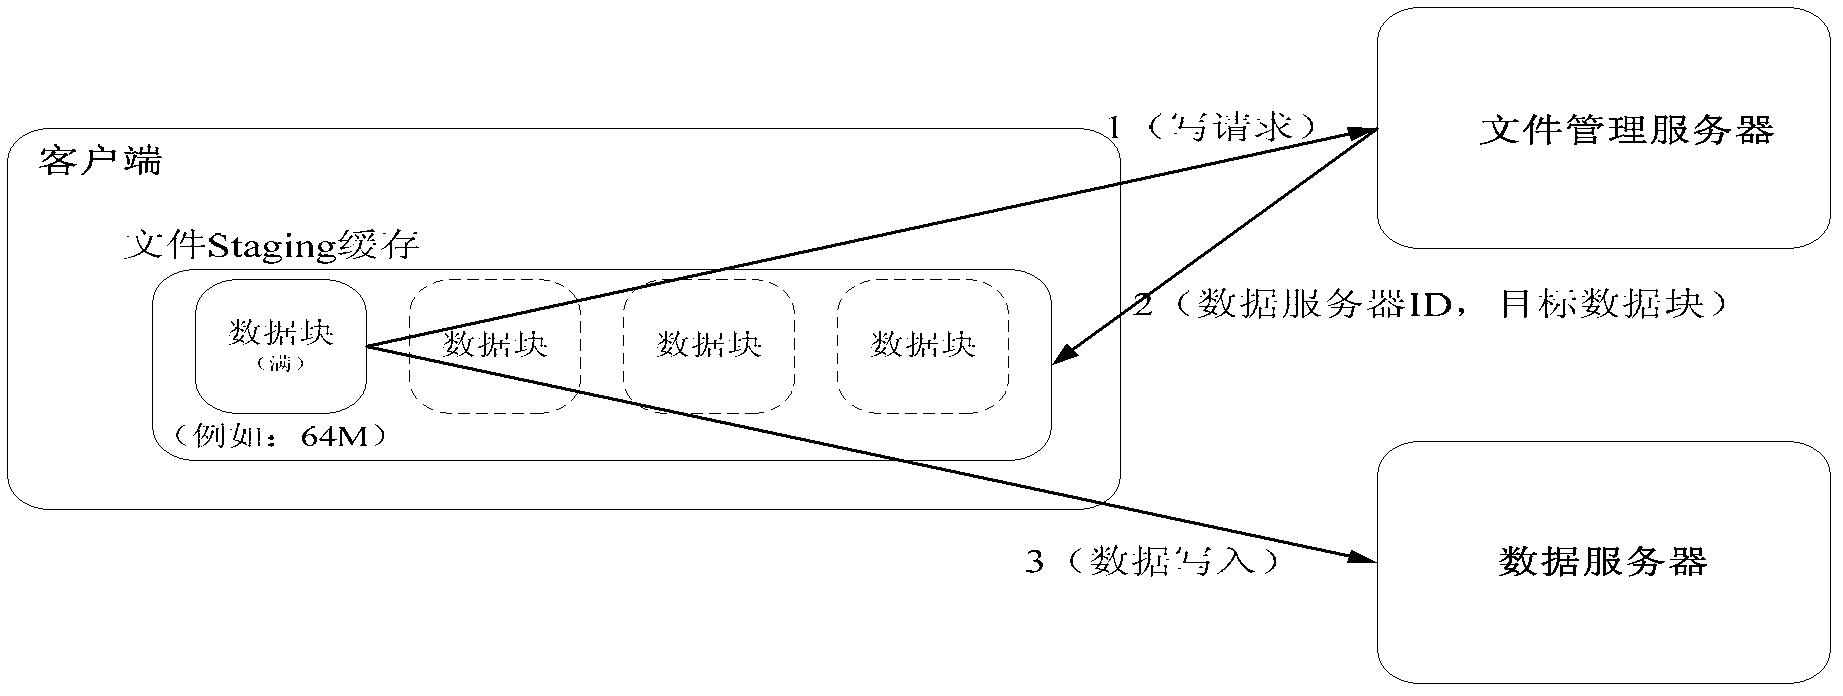 Distributed geographical file system